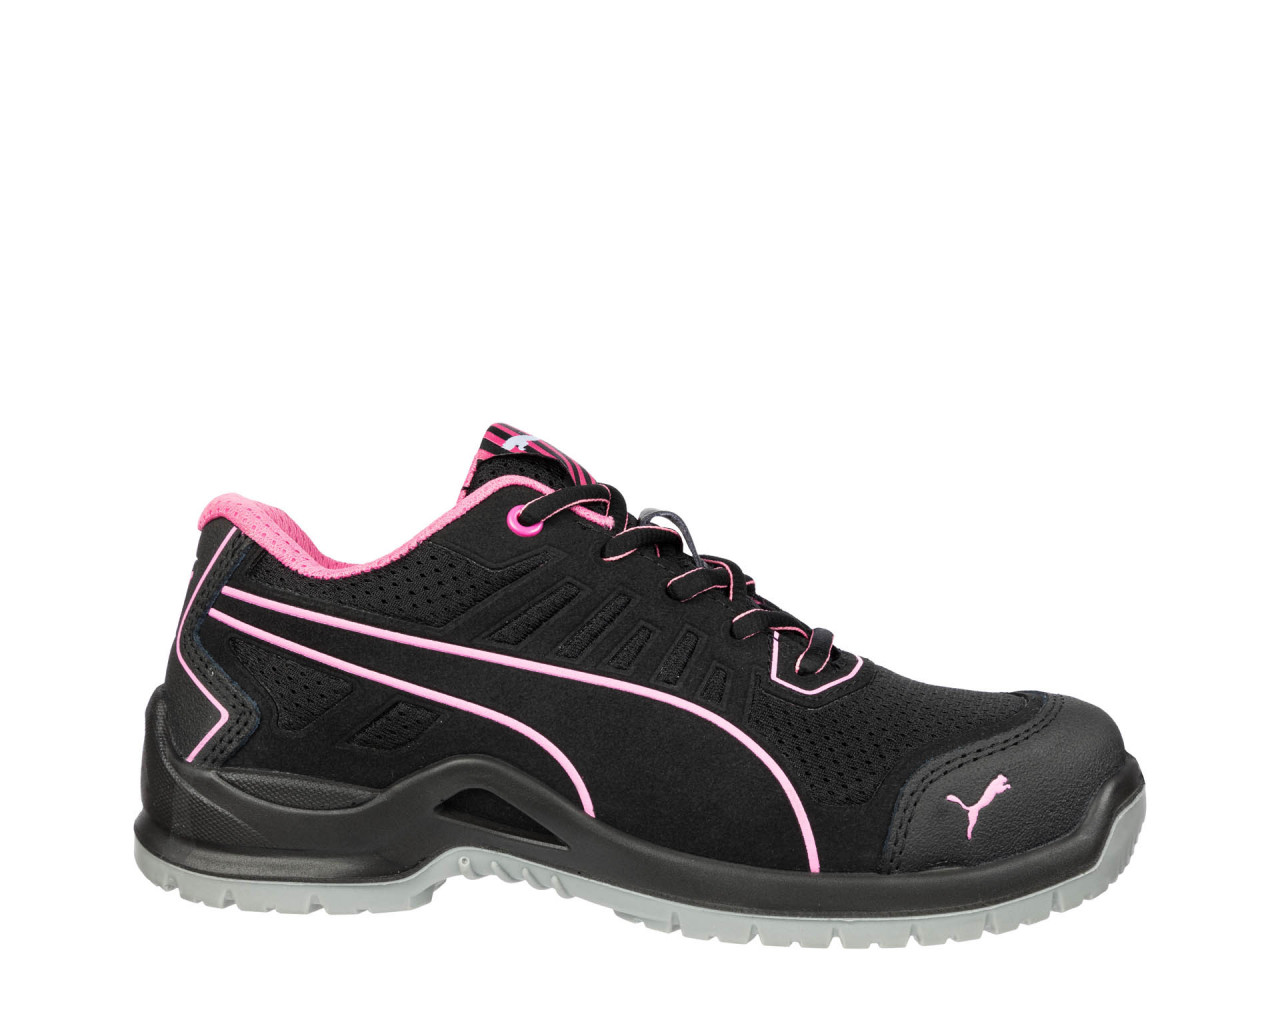 PUMA SAFETY FUSE TC PINK WNS LOW S1P ESD SRC